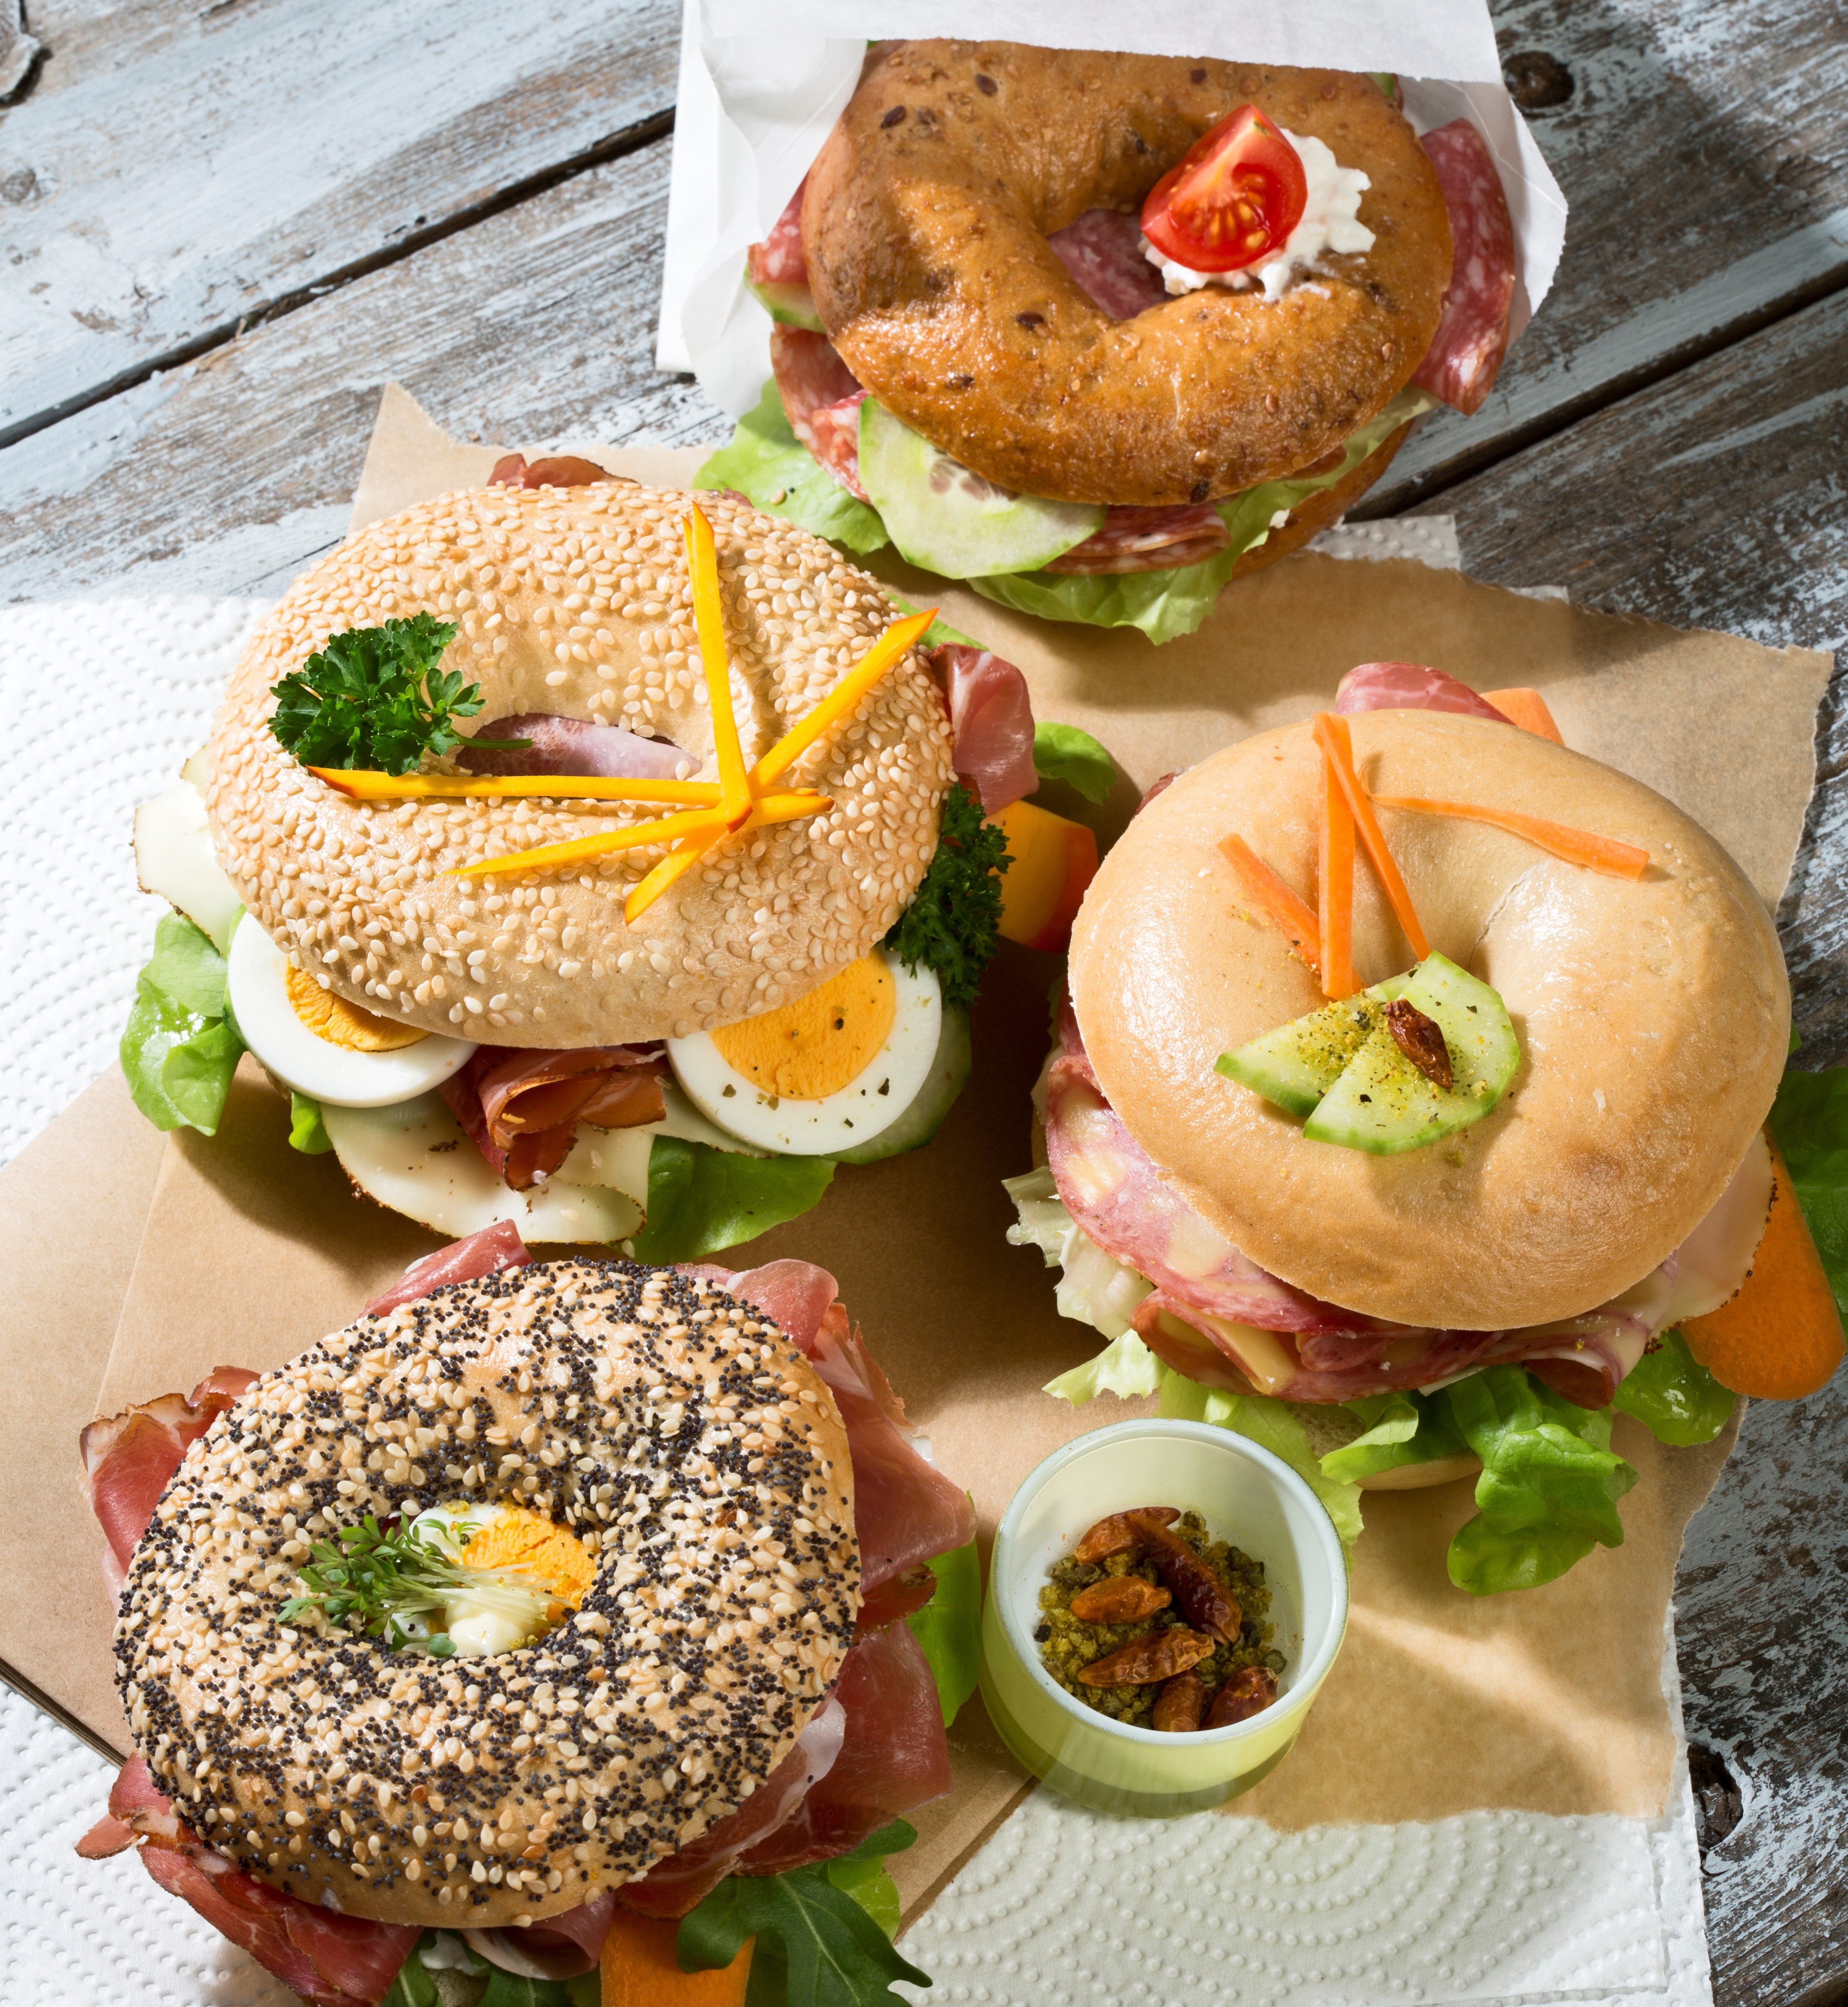 Four different bagels garnished with salami, sausage, slices of bacon, rocket salad, tomato, lettuce, cucumber carrot, egg, cream cheese and cress and parsley